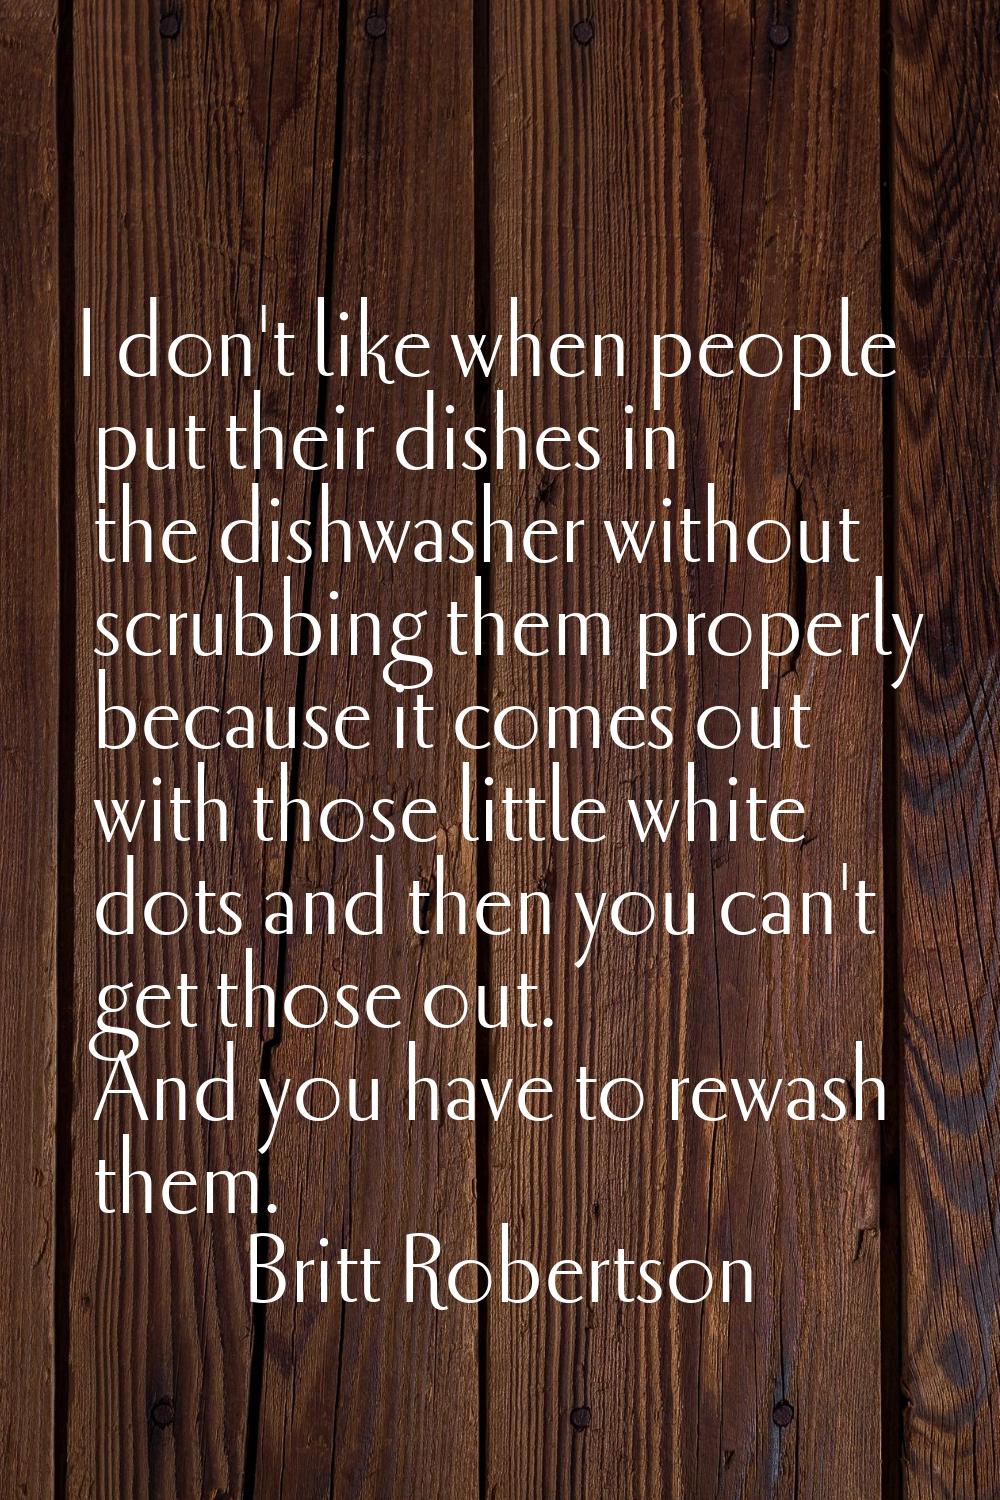 I don't like when people put their dishes in the dishwasher without scrubbing them properly because